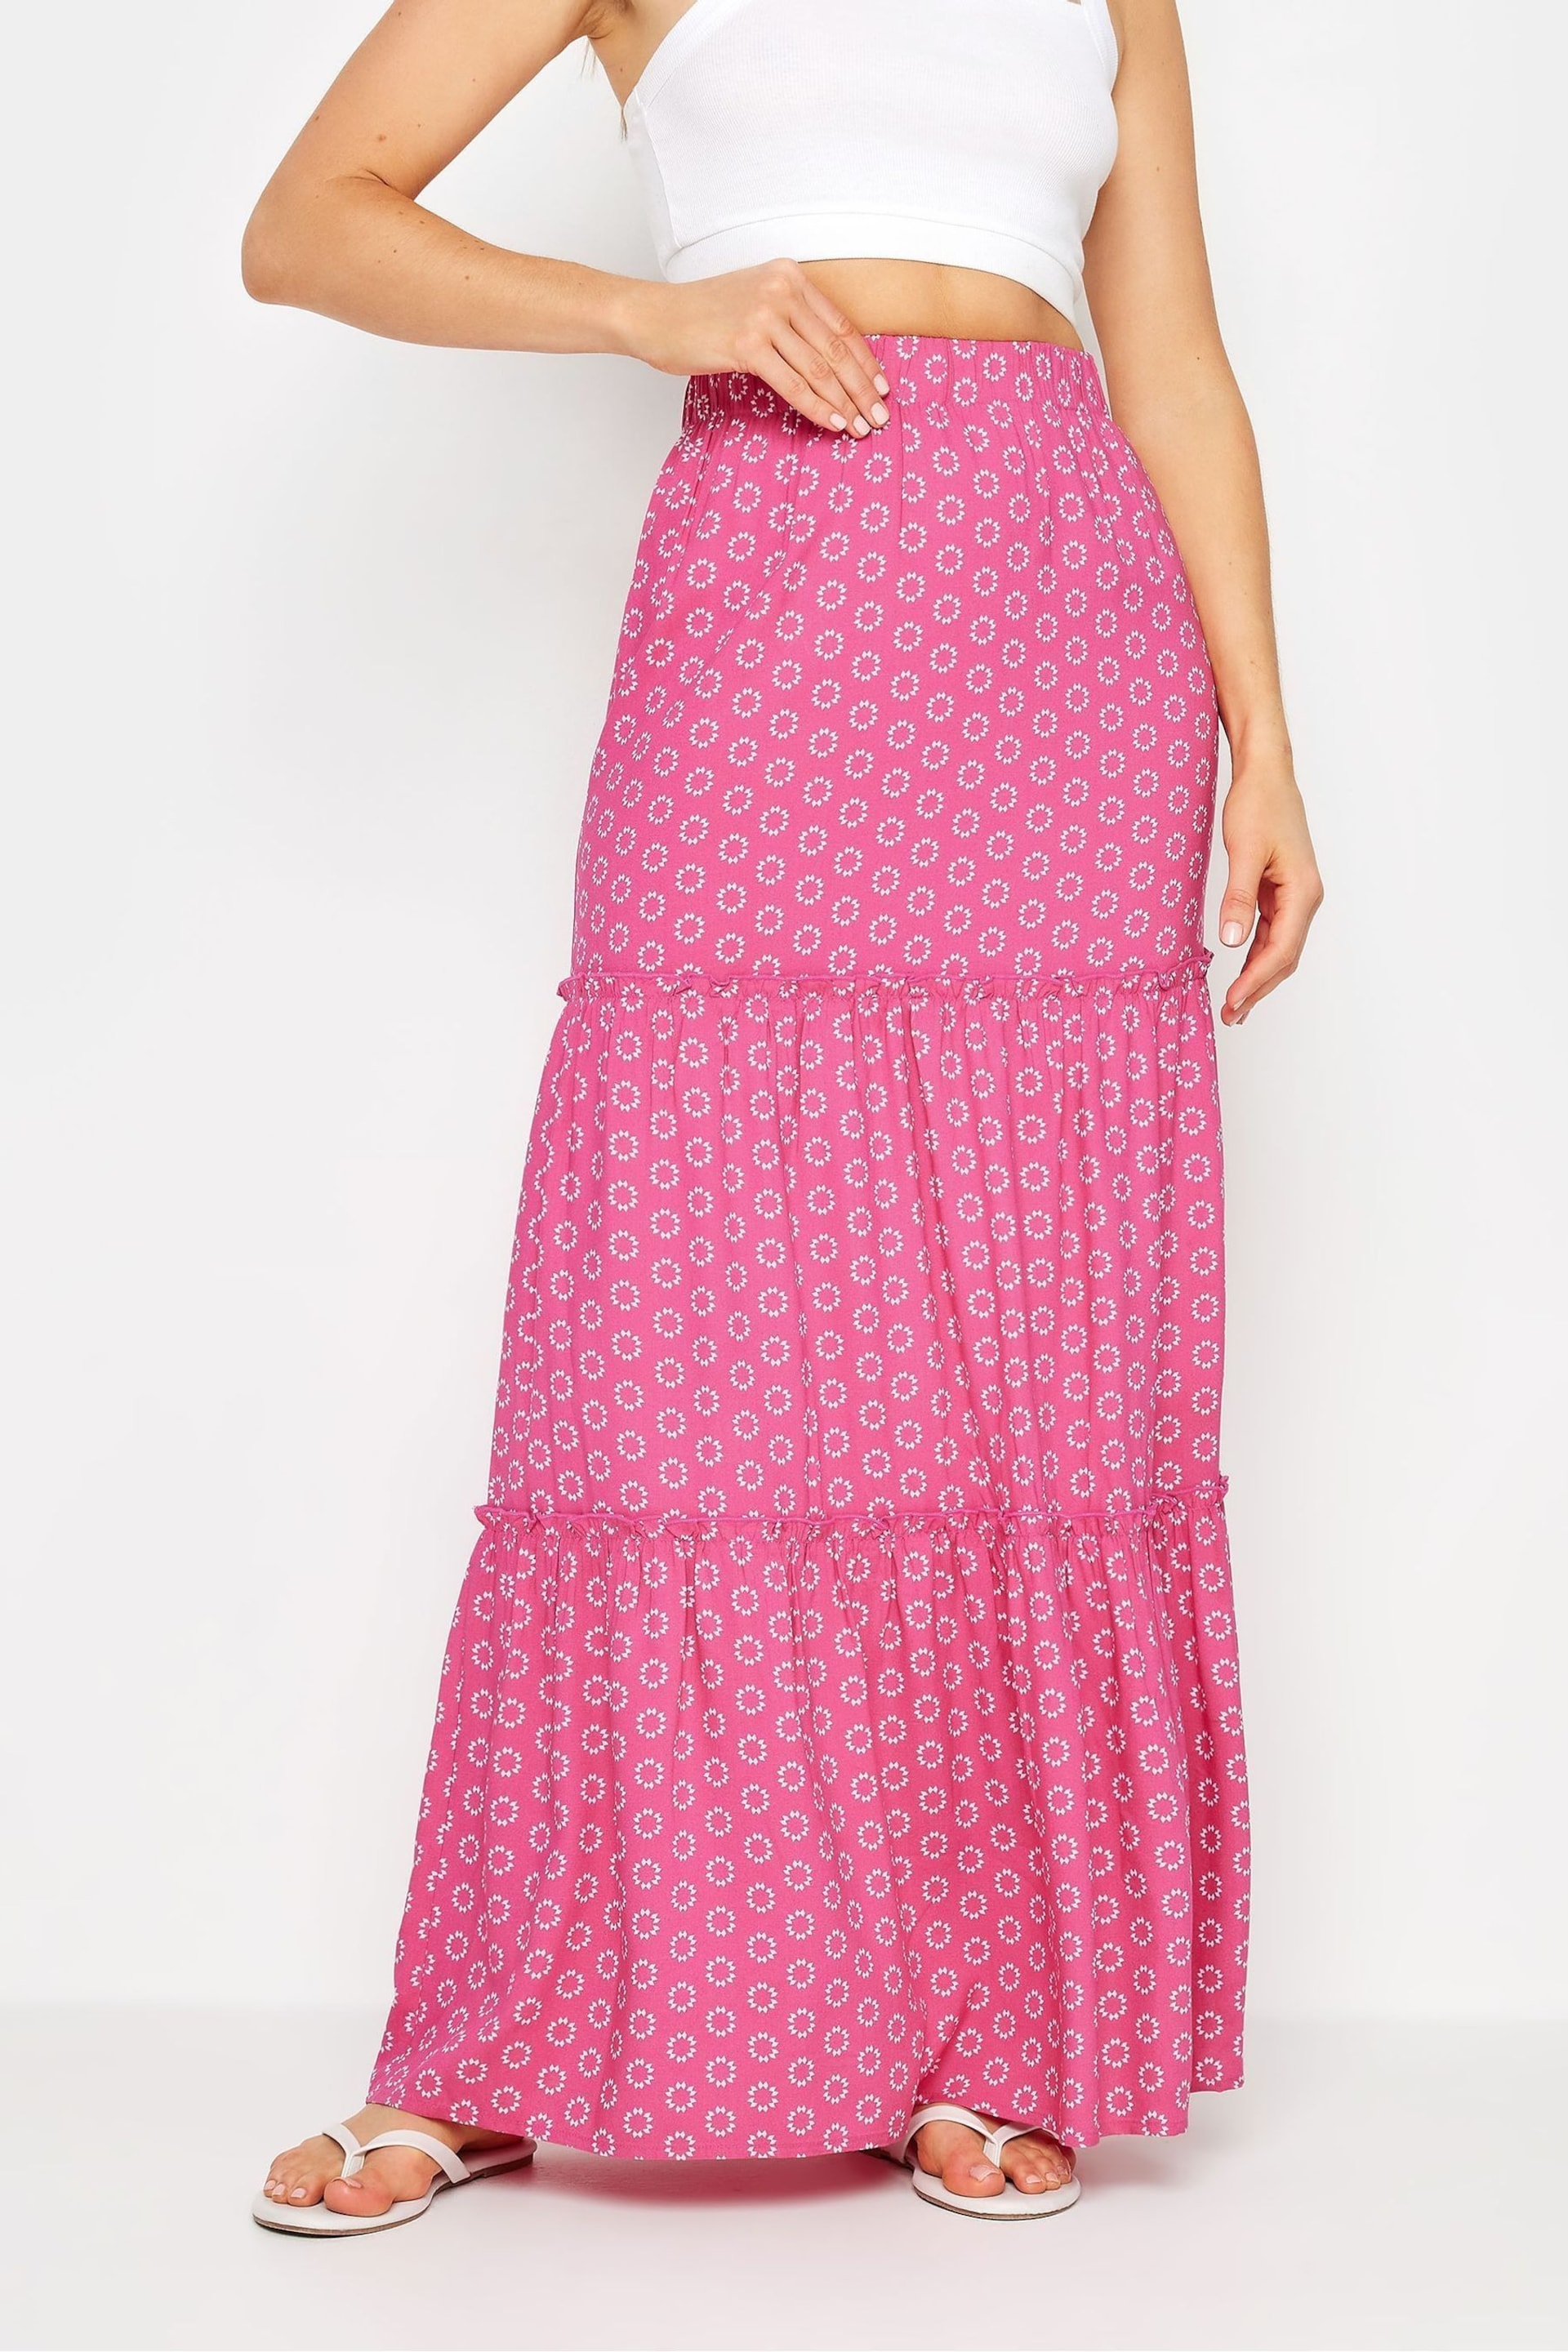 Long Tall Sally Pink Printed Tiered Maxi Skirt - Image 2 of 5